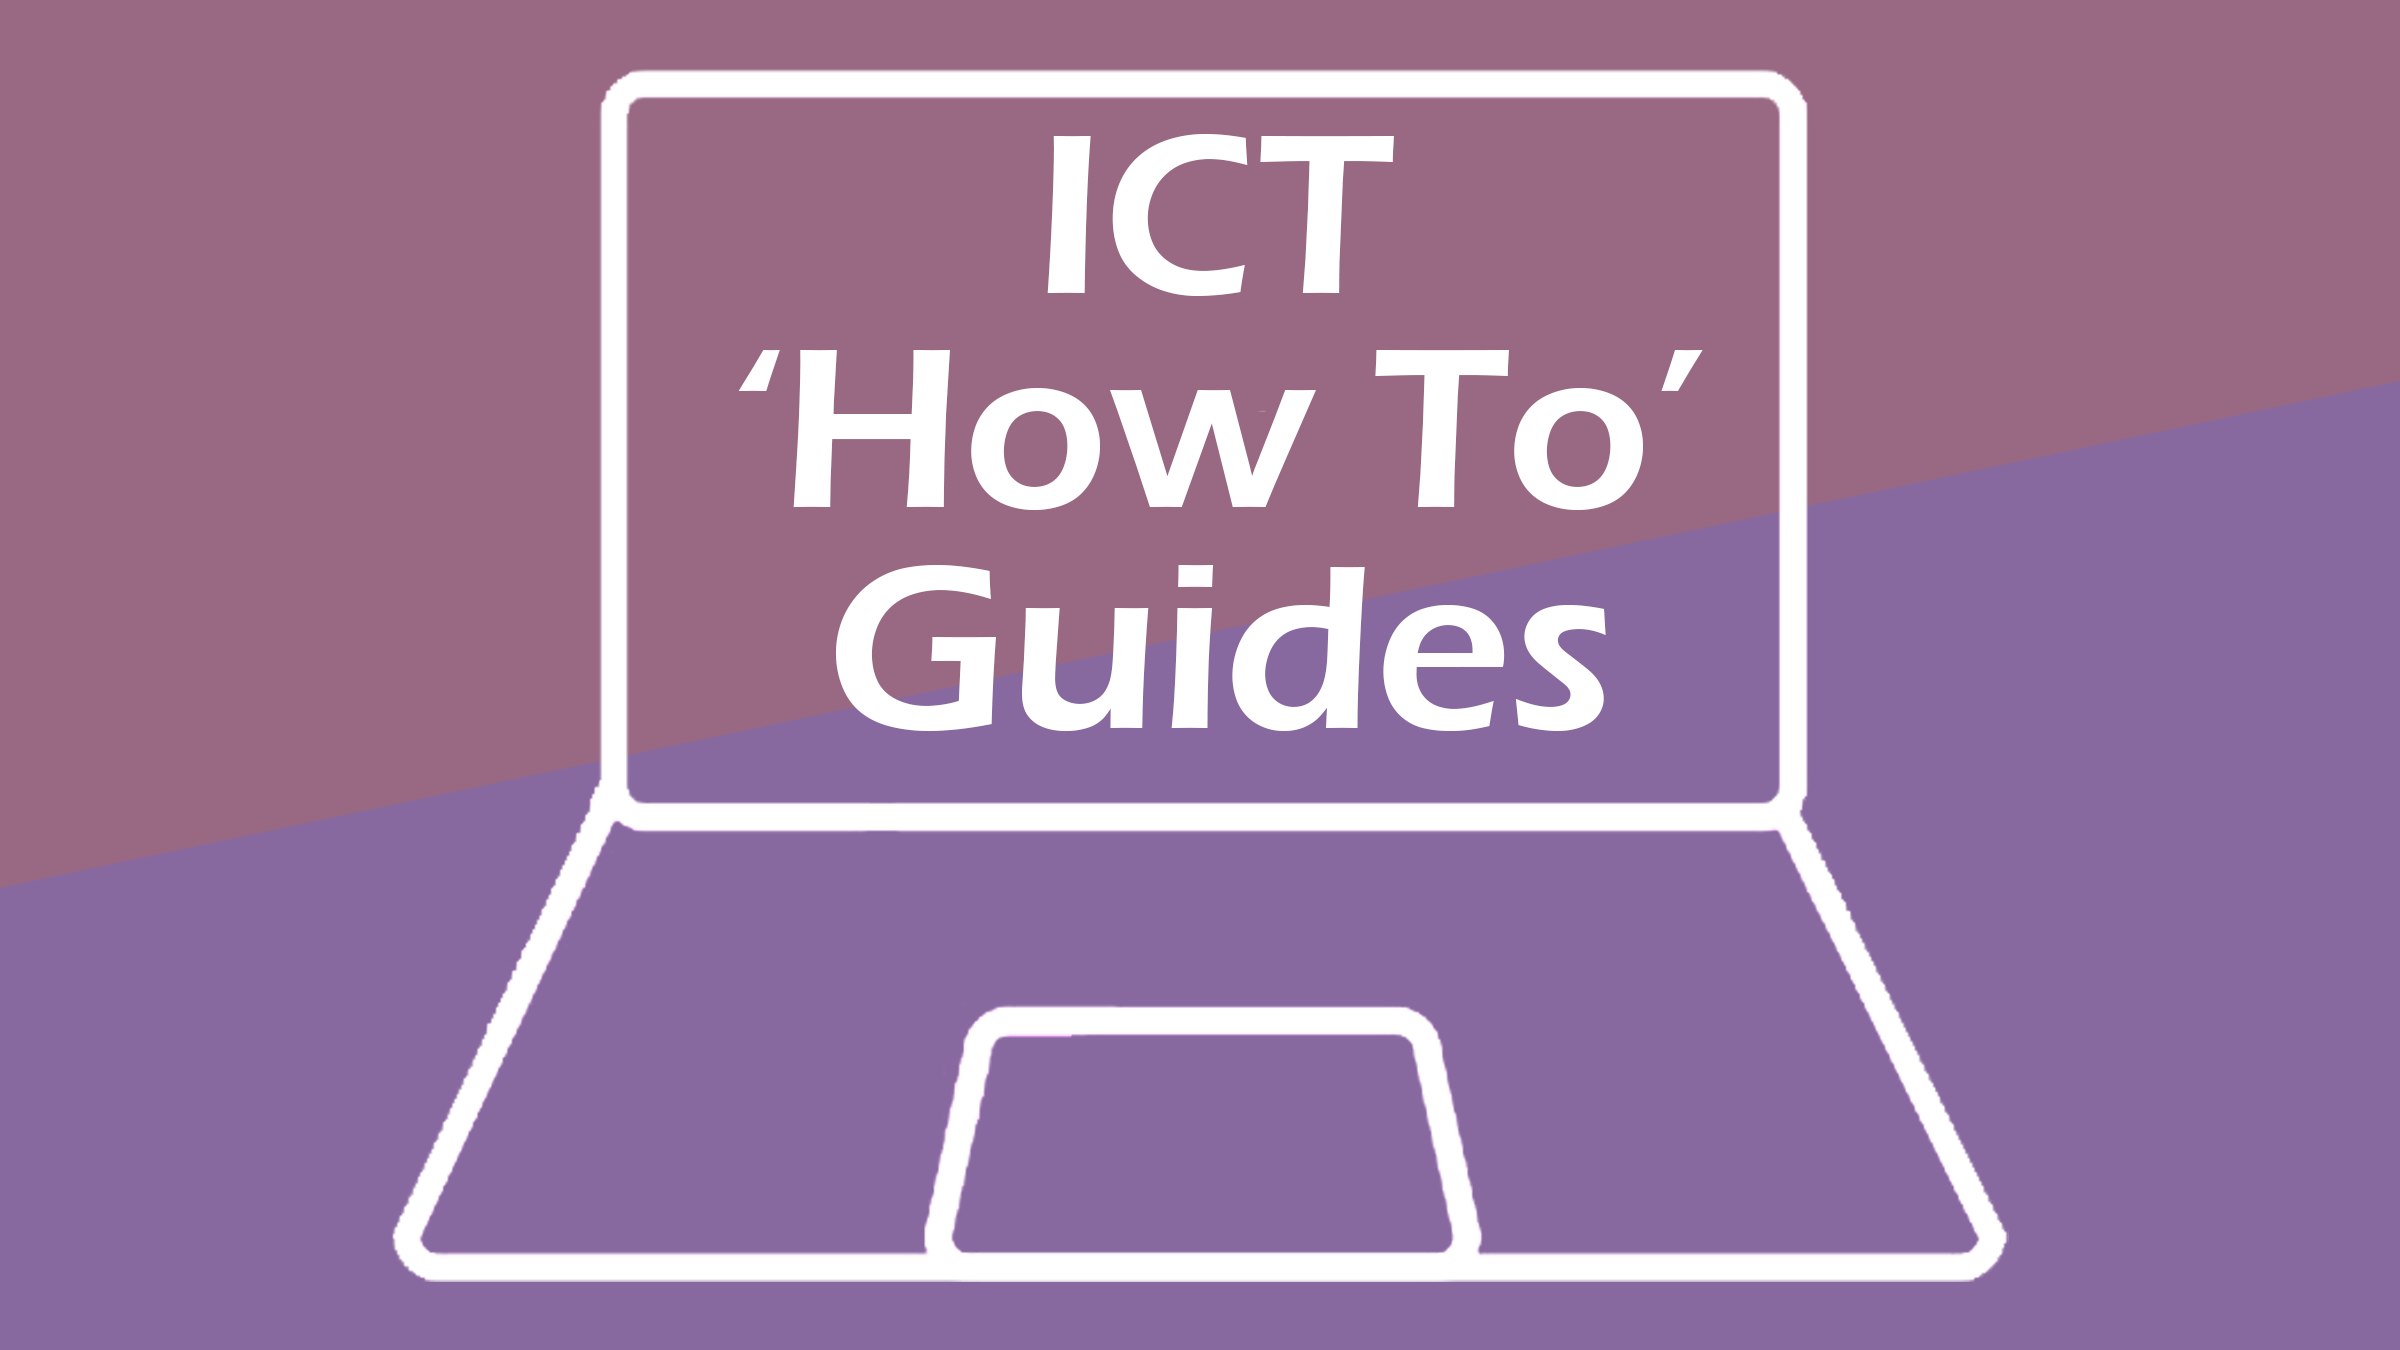 ICT 'How To' Guides